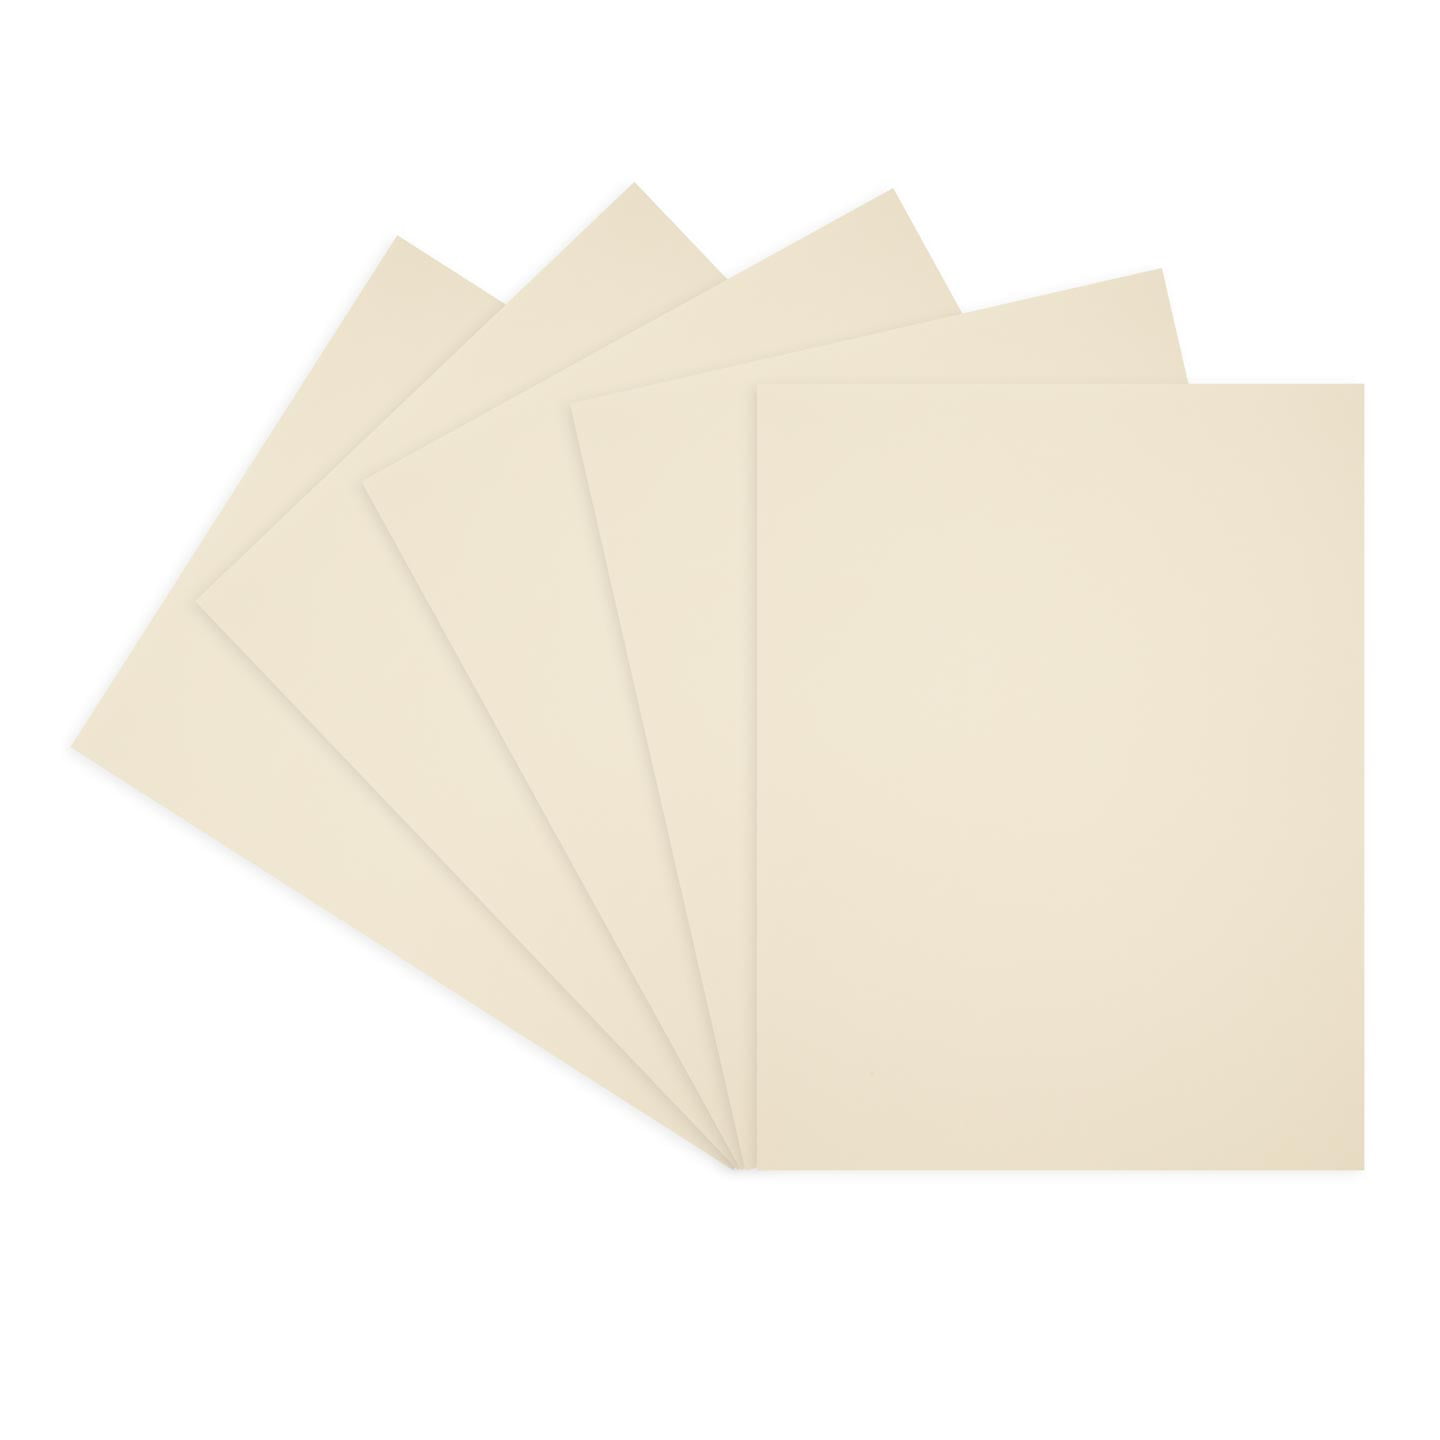 Neenah Bright White Cardstock, 8.5 x 11, 65 lb./176 GSM, 250 Sheets 